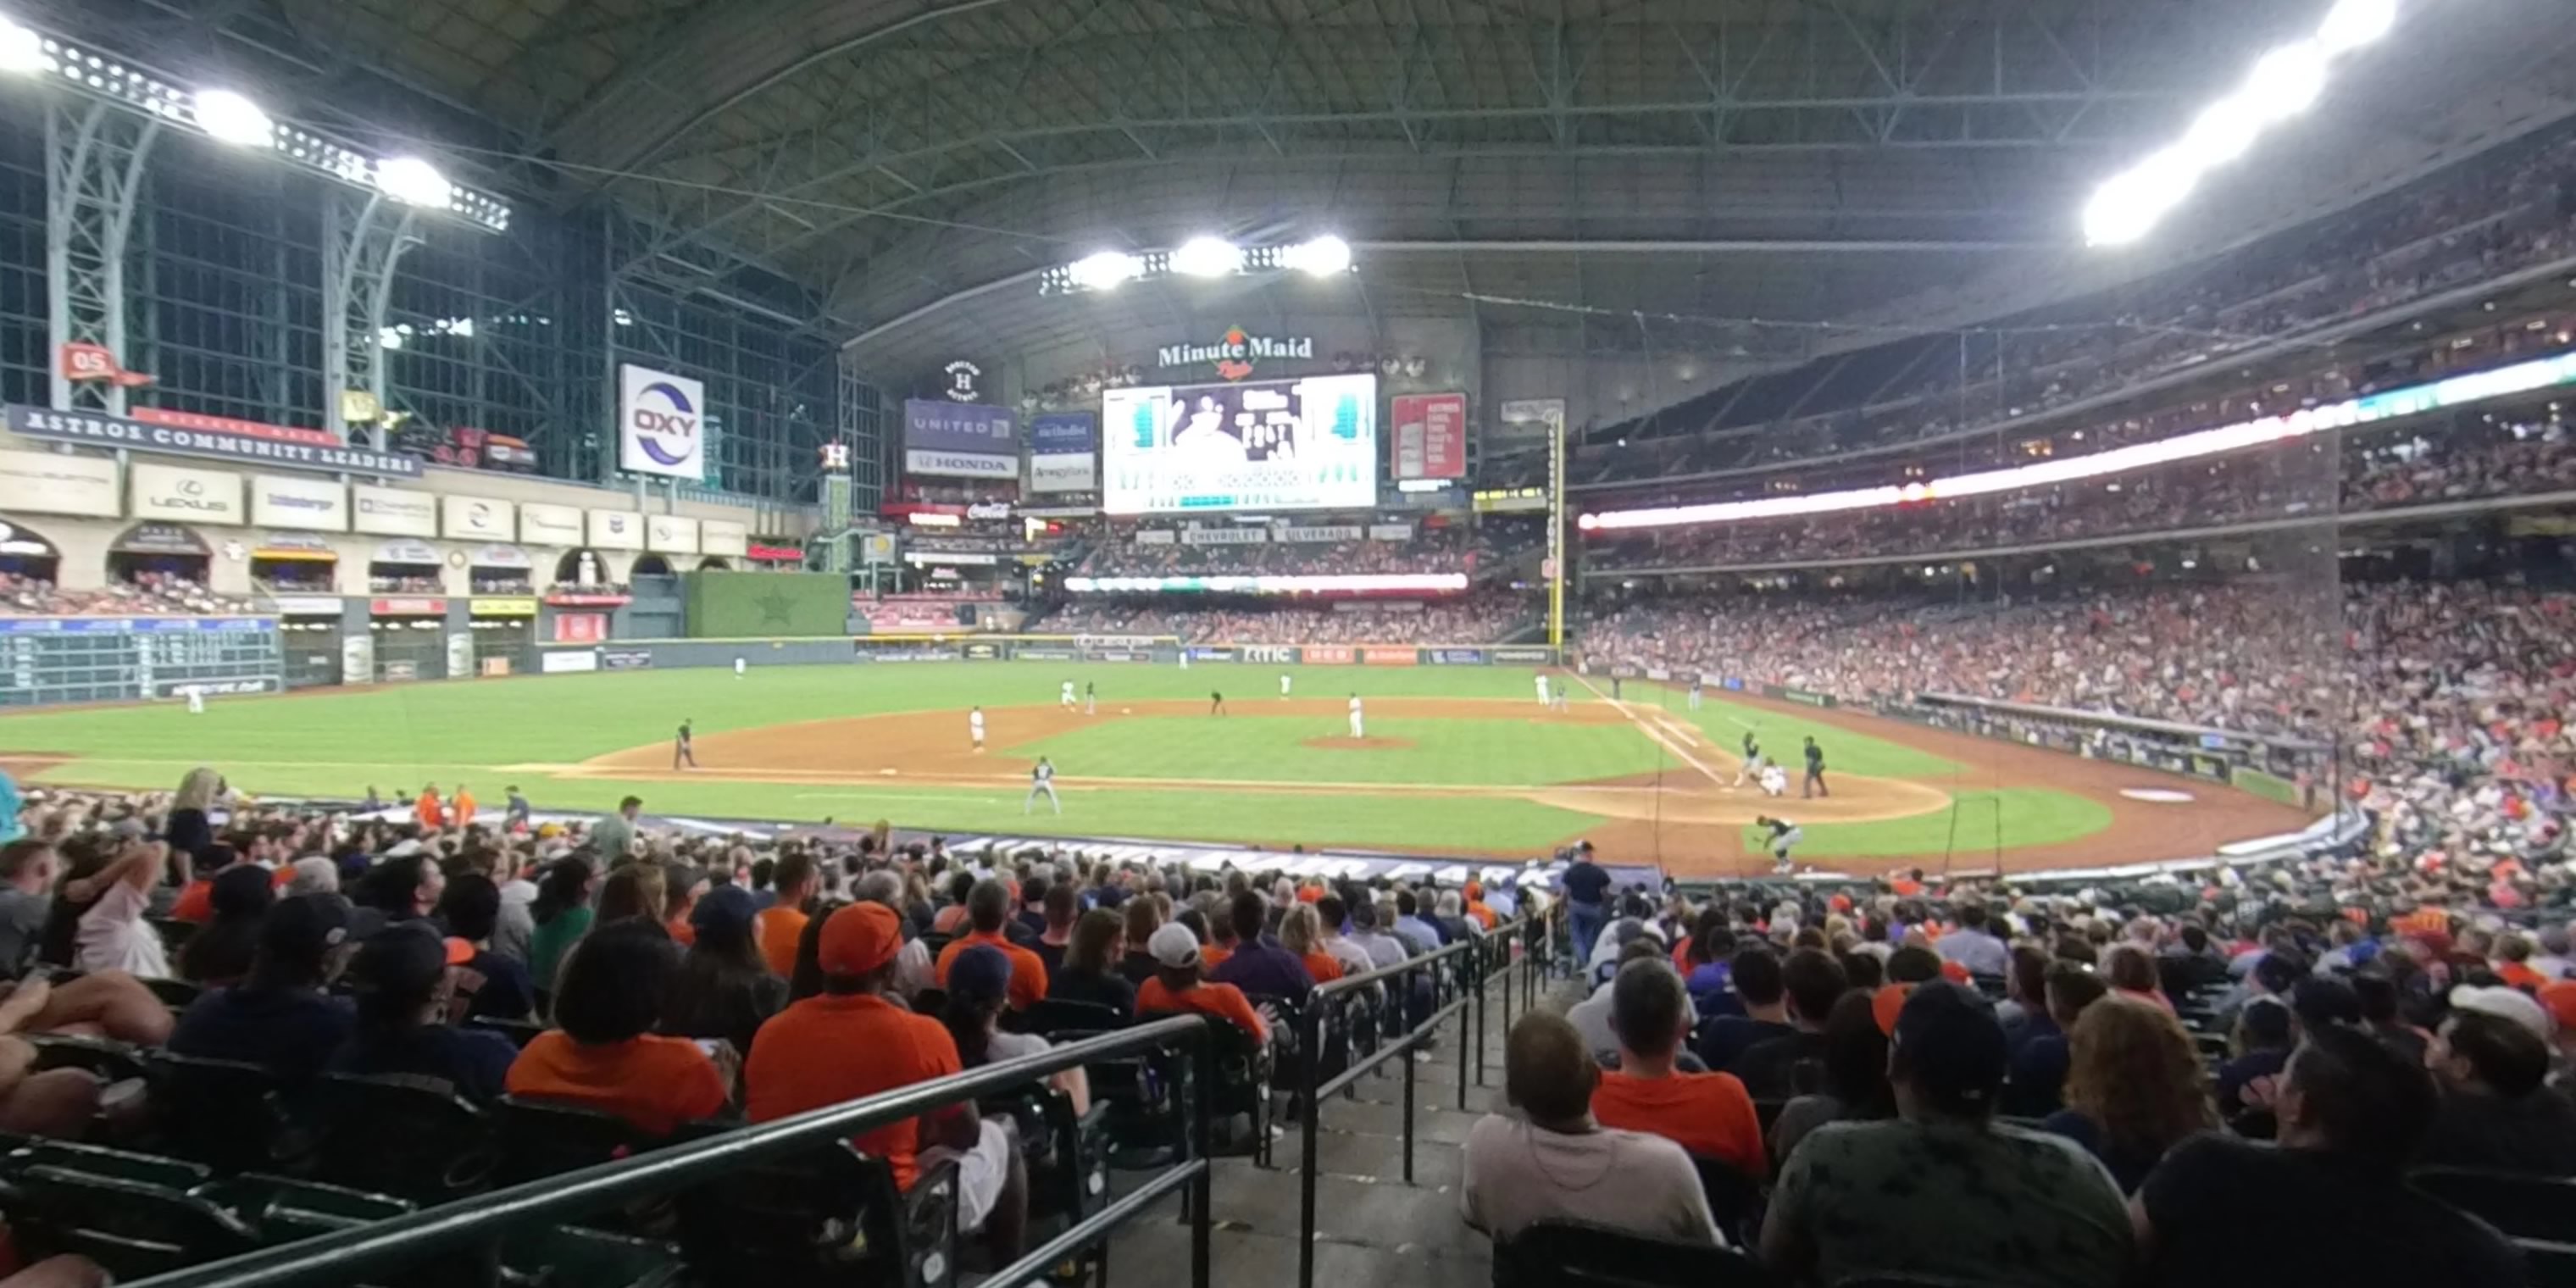 section 114 panoramic seat view  for baseball - minute maid park